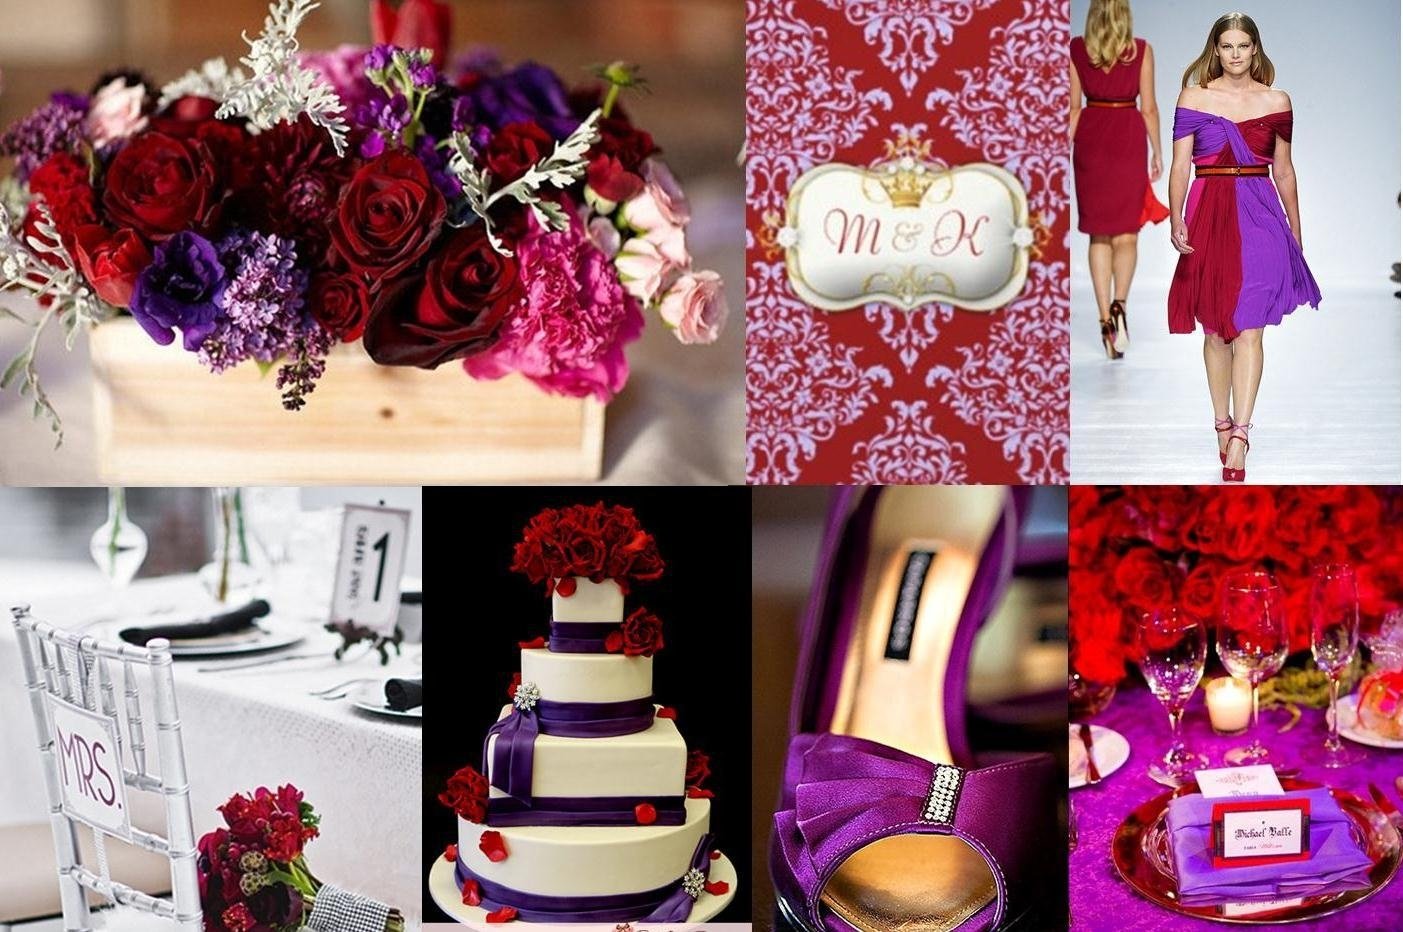 10 Lovely Red And Purple Wedding Ideas purple and red wedding theme wedding ideas uxjj 2 2022